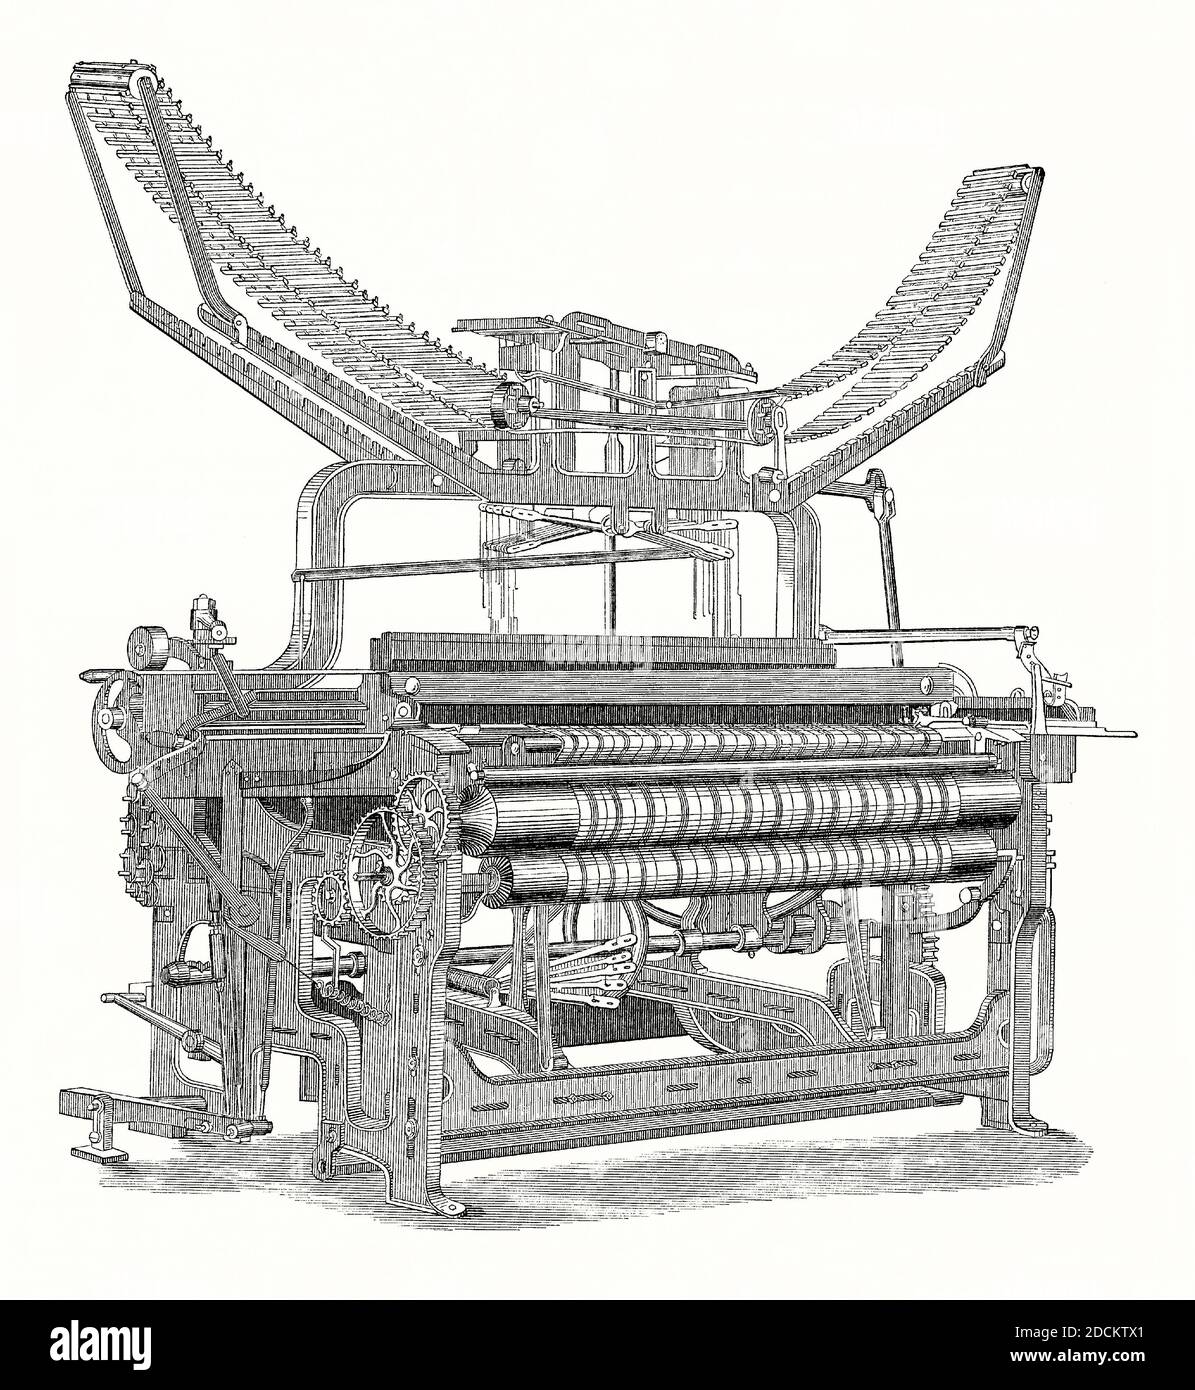 An old engraving of a figure loom, using a ‘dobby’ in the manufacture of patterned cloth in the 1800s. It is from a Victorian mechanical engineering book of the 1880s. Dobby (or dobbie) is a woven fabric produced on the dobby loom. The fabric produced is characterised by small geometric patterns and extra texture in the cloth. The warp and weft threads may of different colours. A harness-controlling mechanism is located at the centre of the loom. This connects to pattern chains that are mounted at the top of the loom. Englishman Edmund Cartwright built and patented a power loom in 1785. Stock Photo